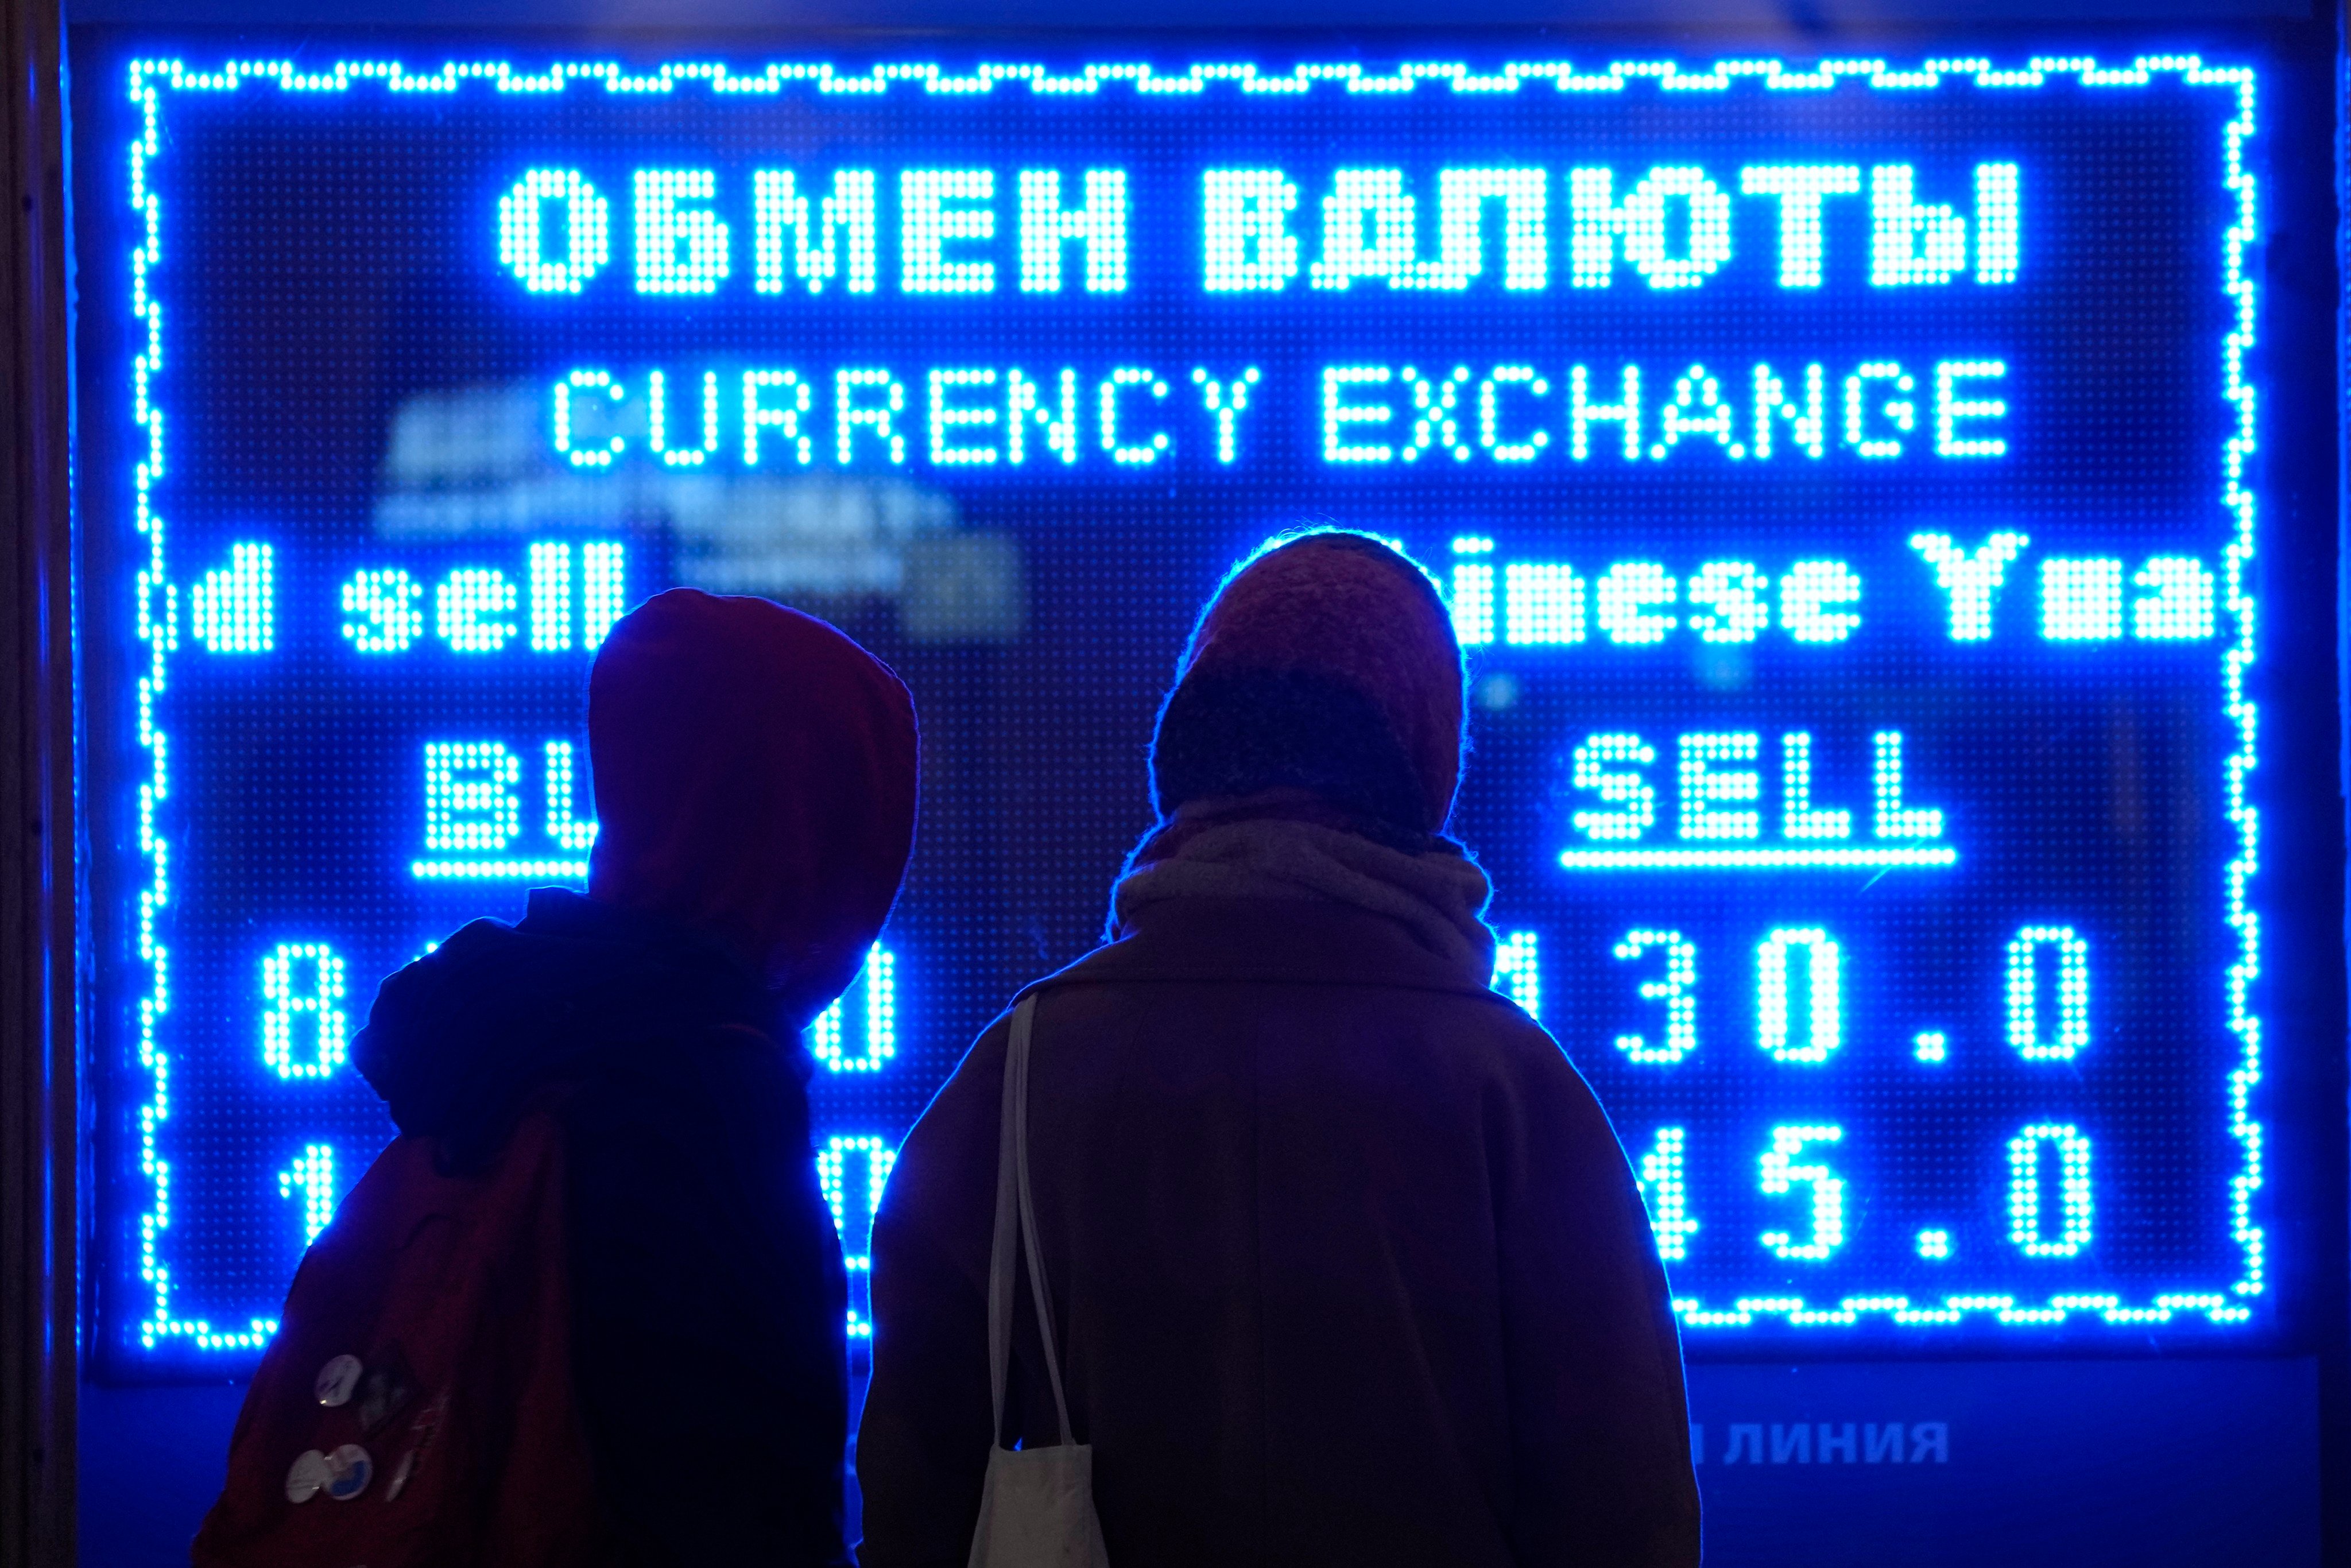 Women look at a screen showing the exchange rate at a currency exchange office in St Petersburg, Russia on March 1, 2022 as the Russian currency plunges against the US dollar after Western nations announced moves to block some Russian banks from the Swift international payment system. Photo: AP